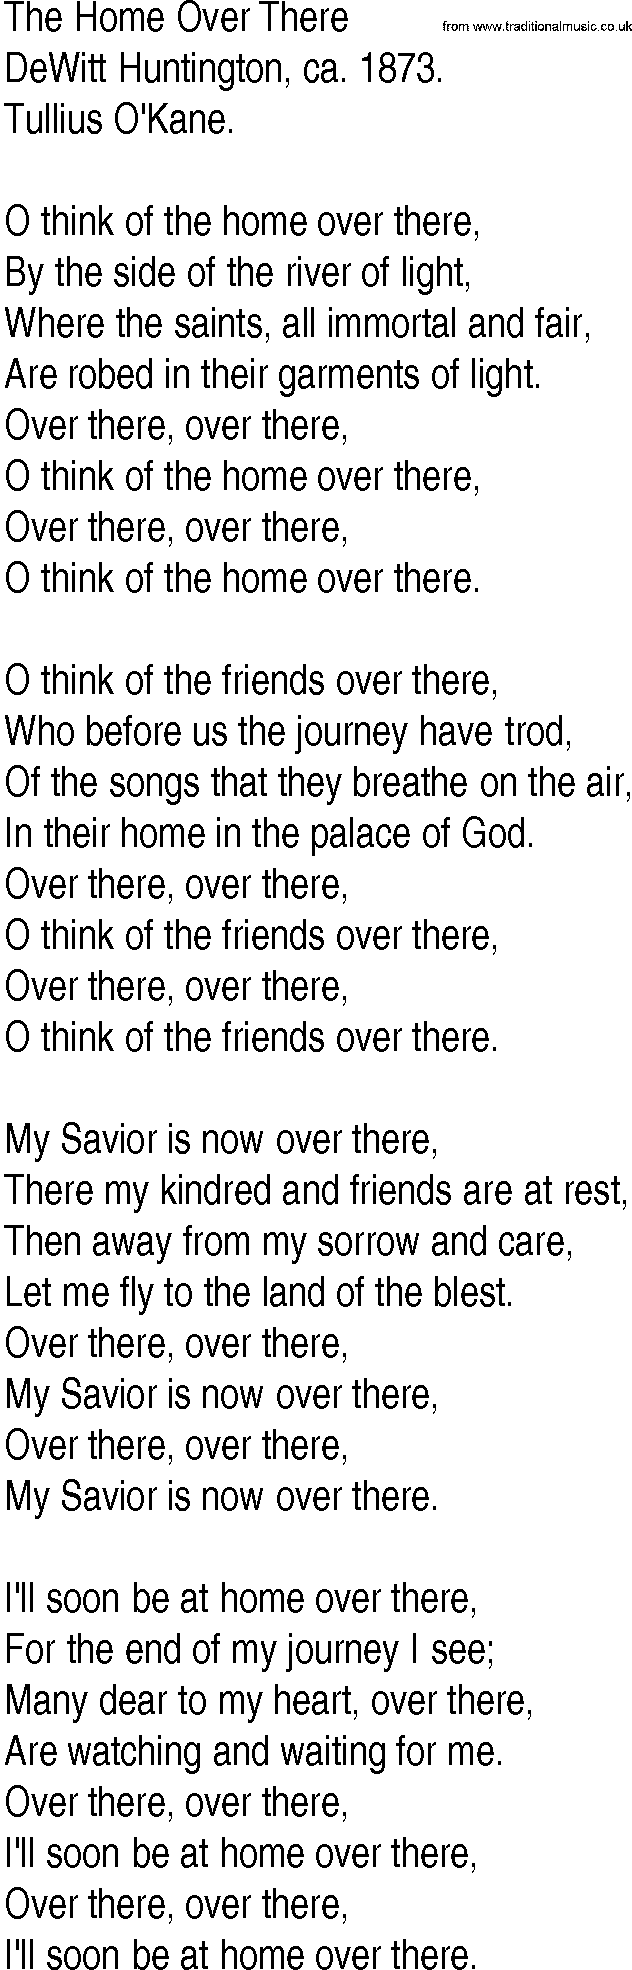 Hymn and Gospel Song: The Home Over There by DeWitt Huntington ca lyrics